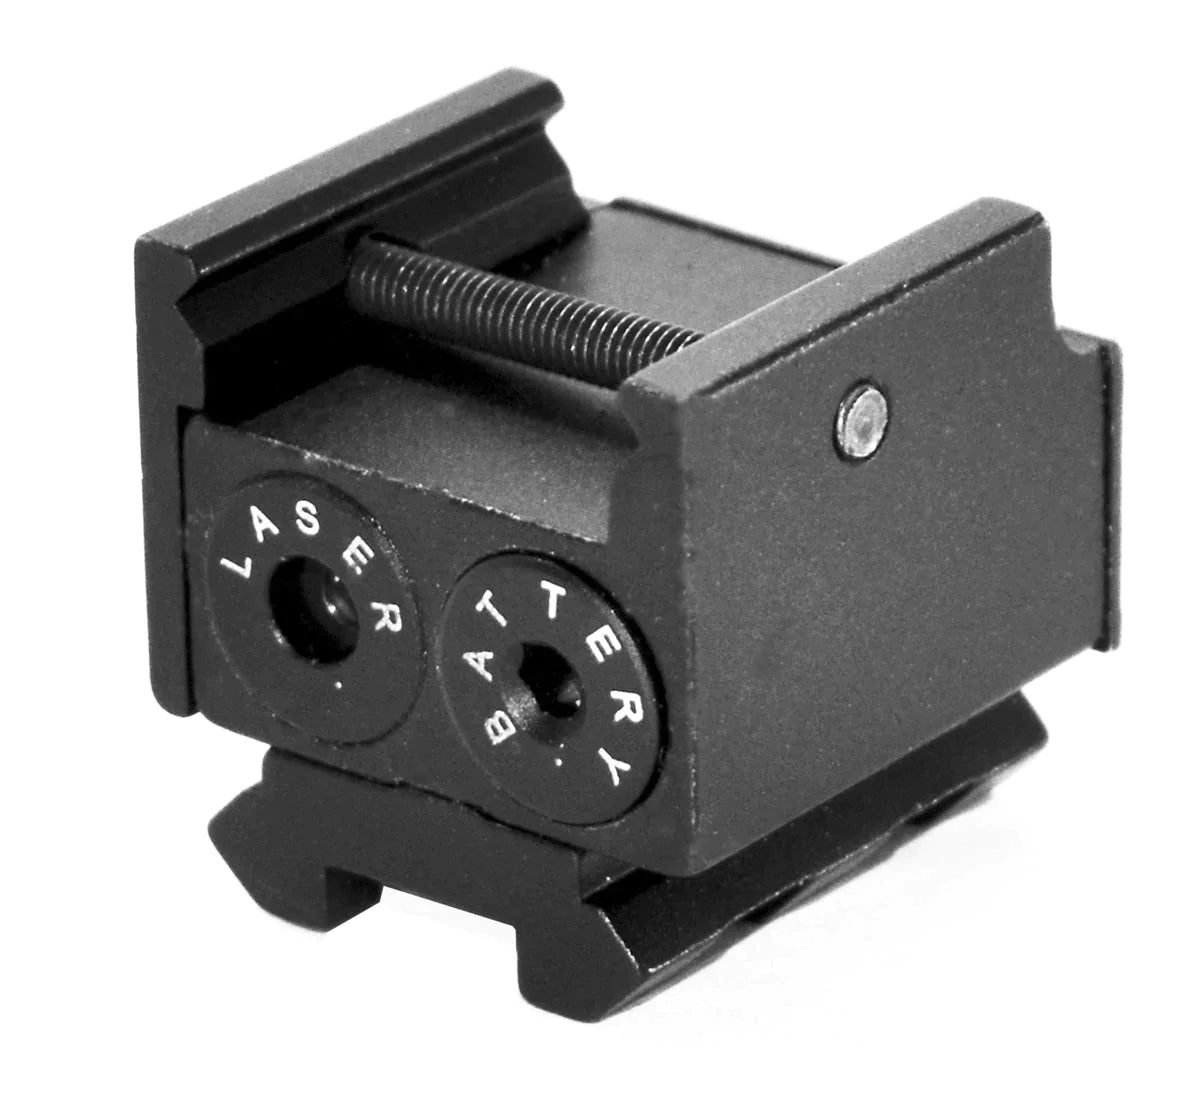 Trinity Compact red dot Sight for Walther CCP Tactical Optics Home Defense Accessory Picatinny Weaver Mount Adapter Aluminum Black.